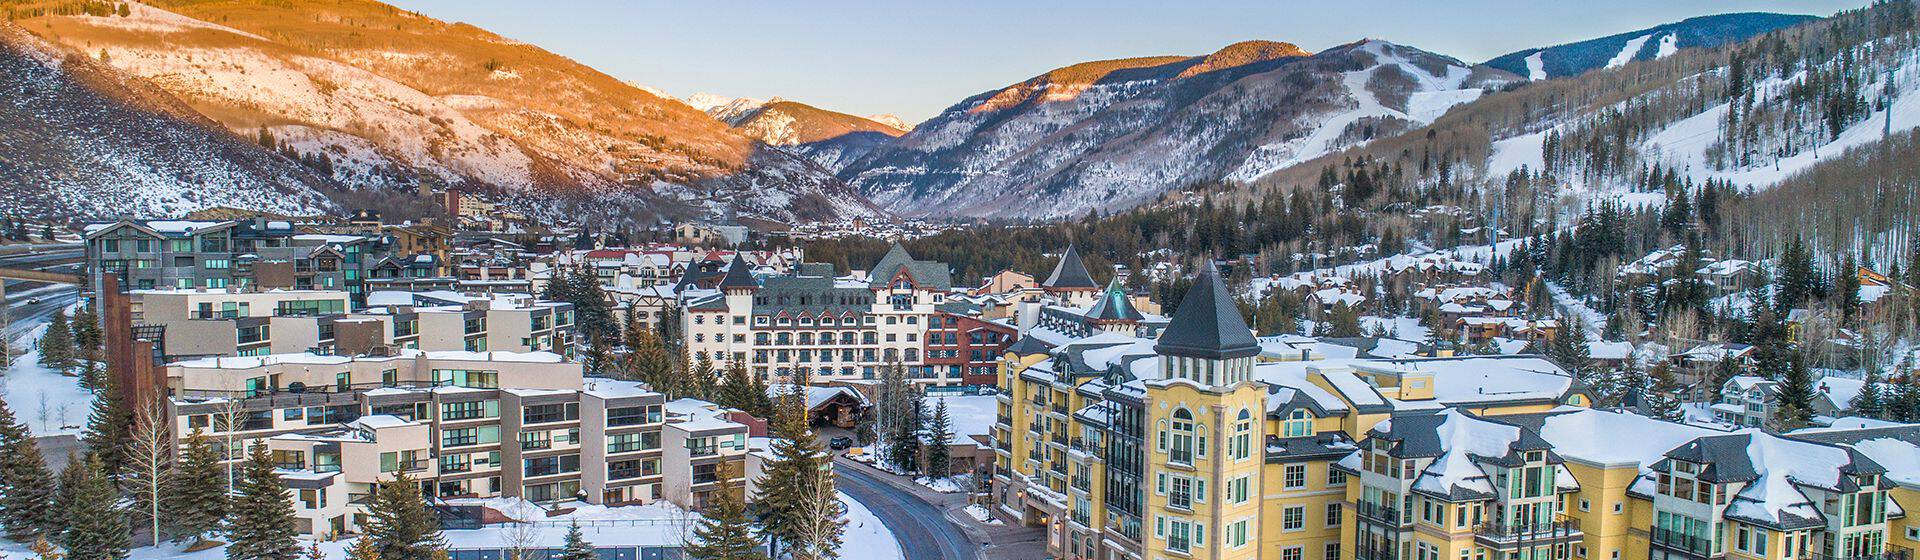 Holidays to Vail Image